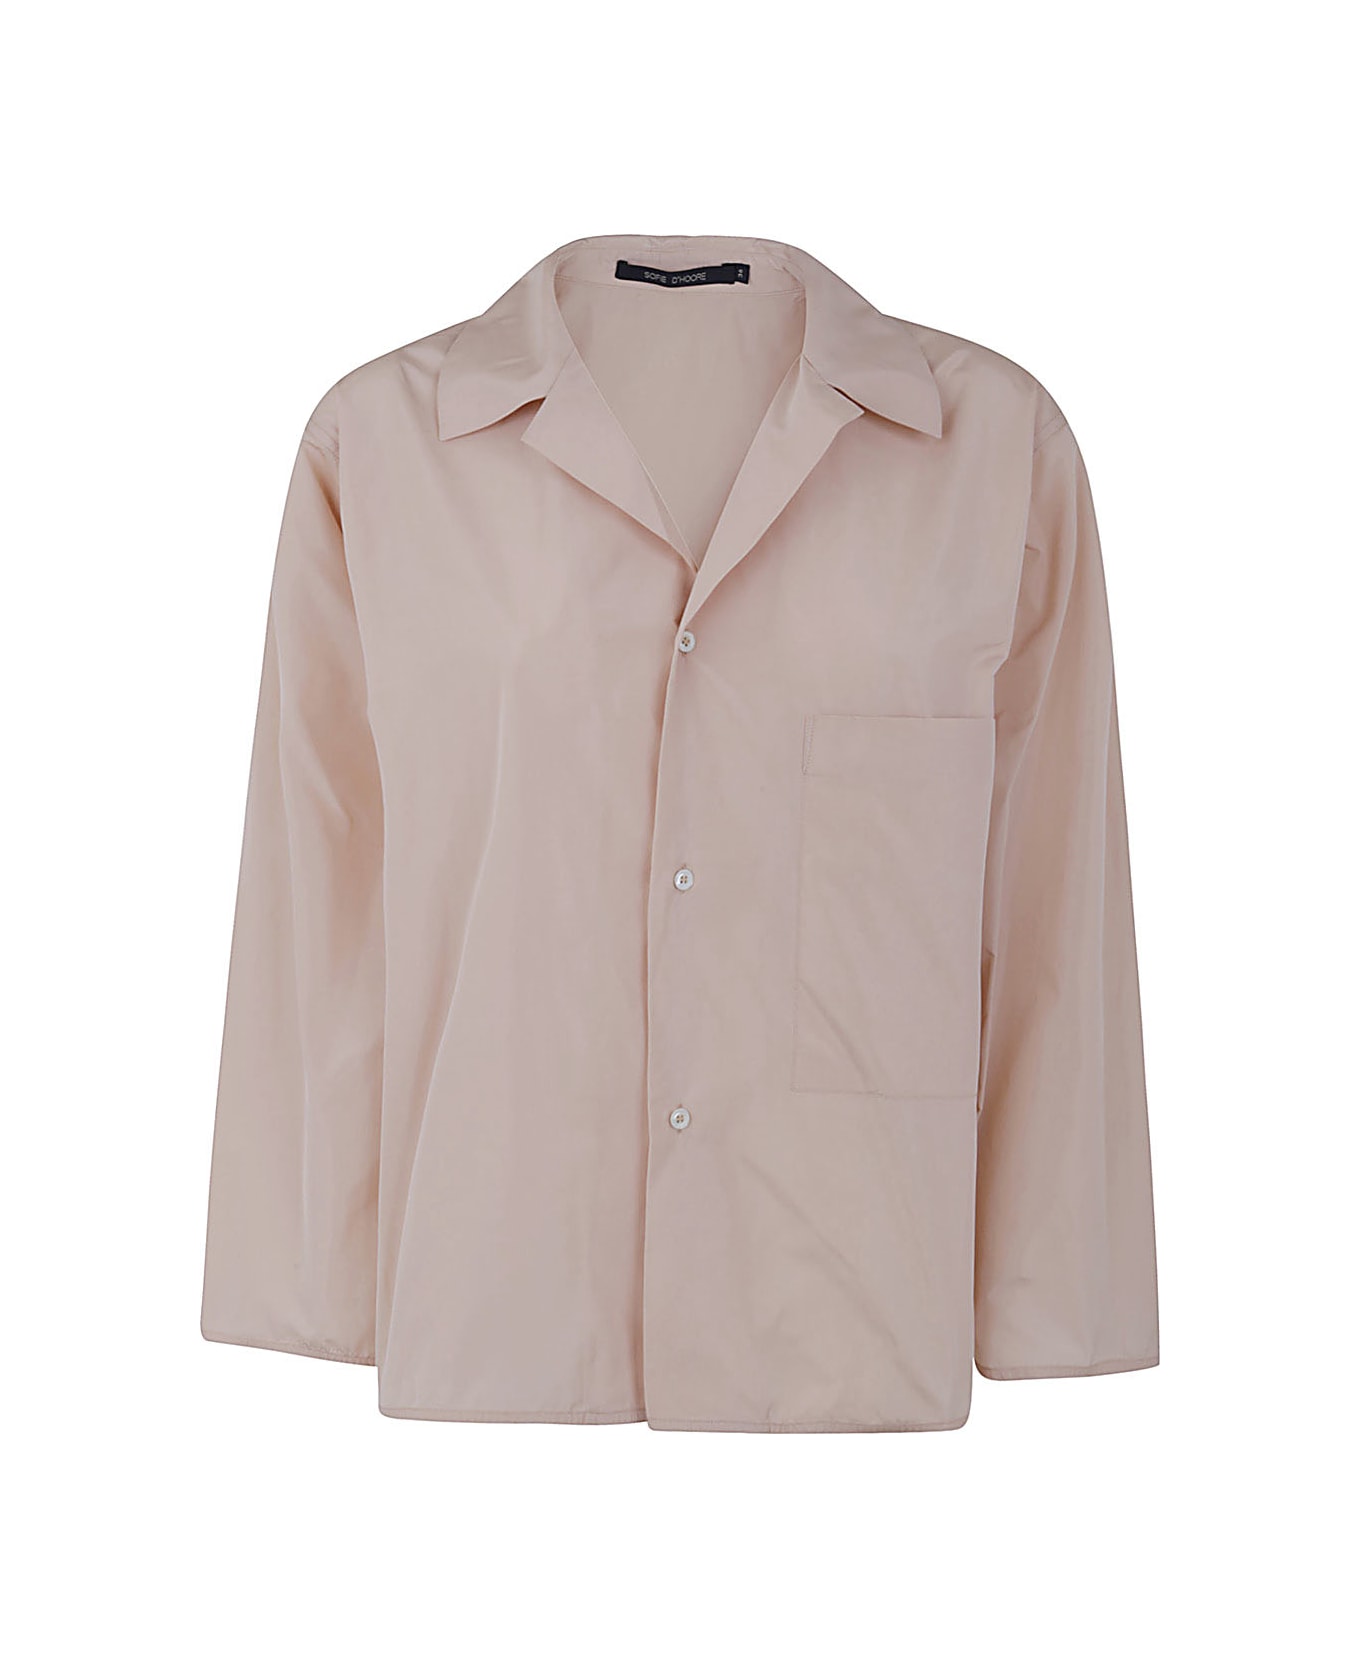 Sofie d'Hoore Long Sleeve Shirt With Front Applied Pocket - Nude シャツ